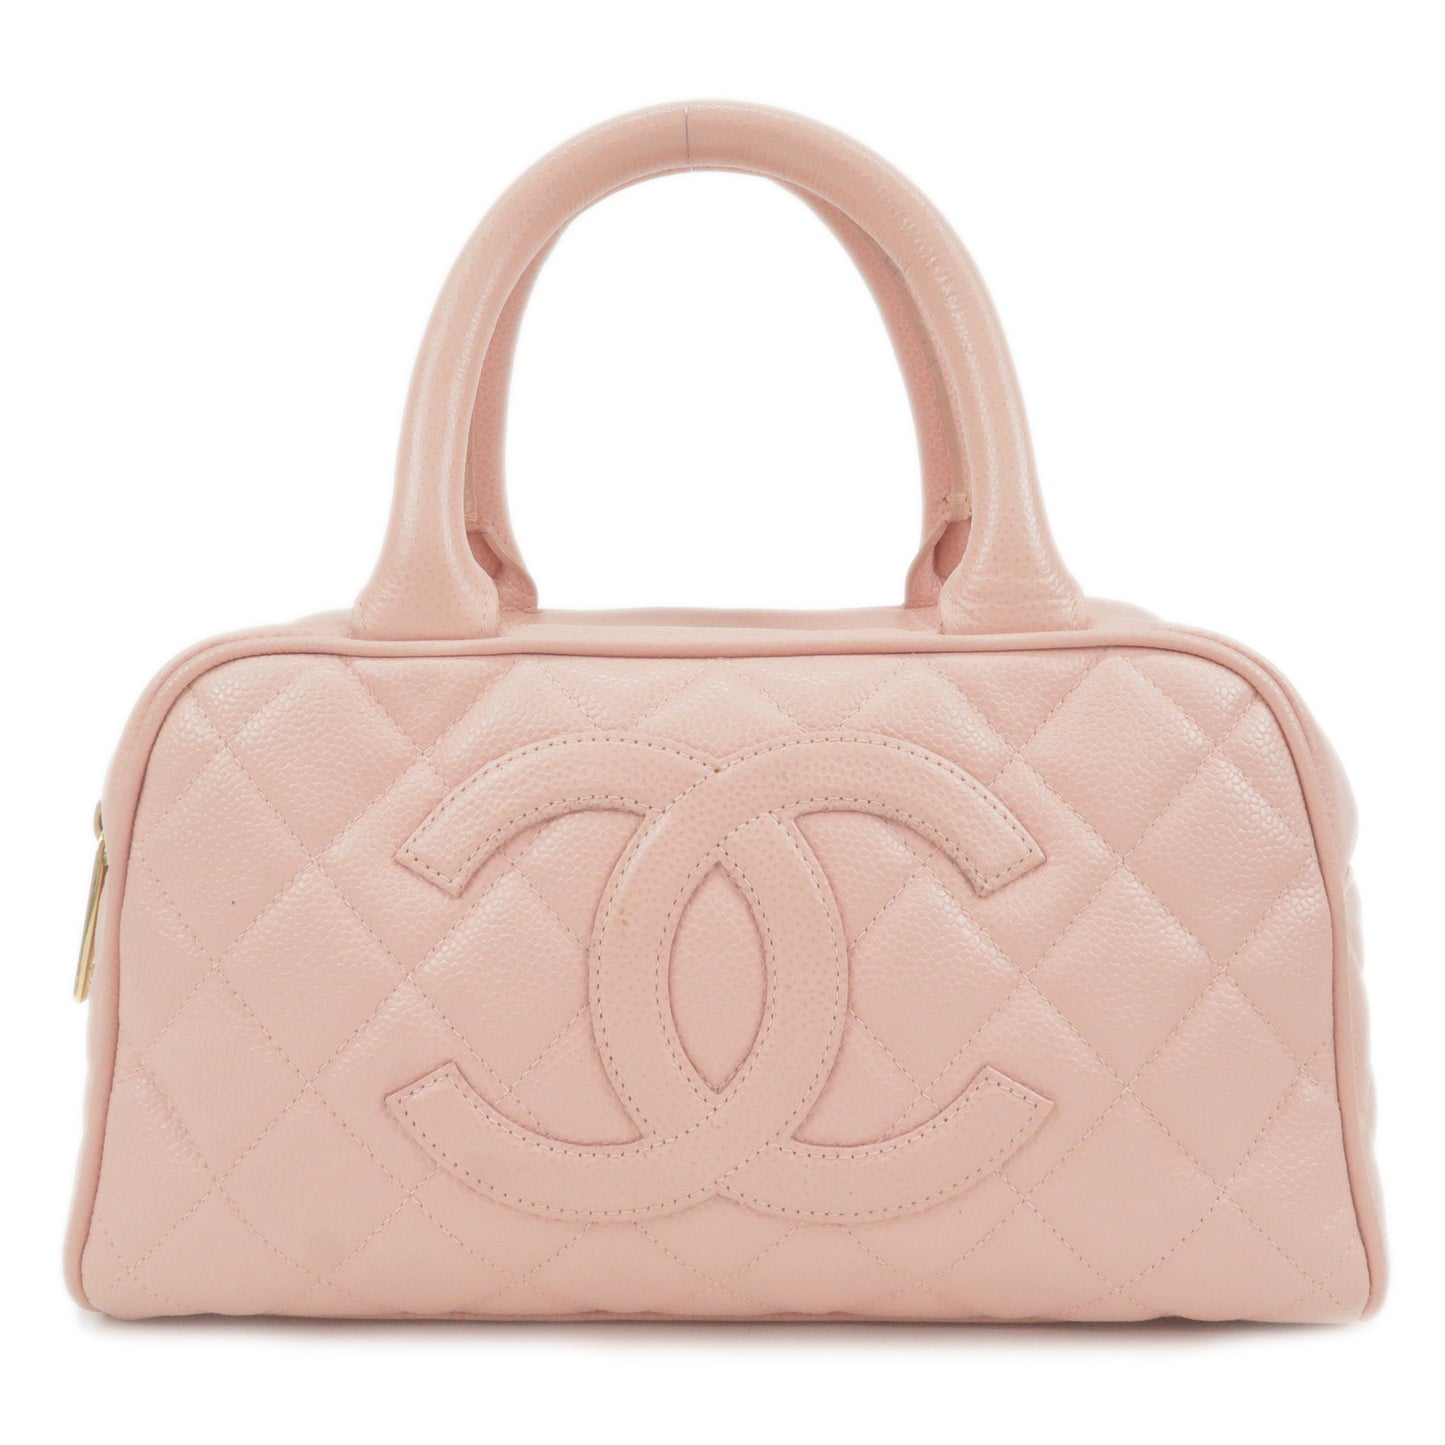 Chanel Diaper Bags - 2 For Sale on 1stDibs  chanel mommy bag, chanel  deauville diaper bag, chanel.diaper bag